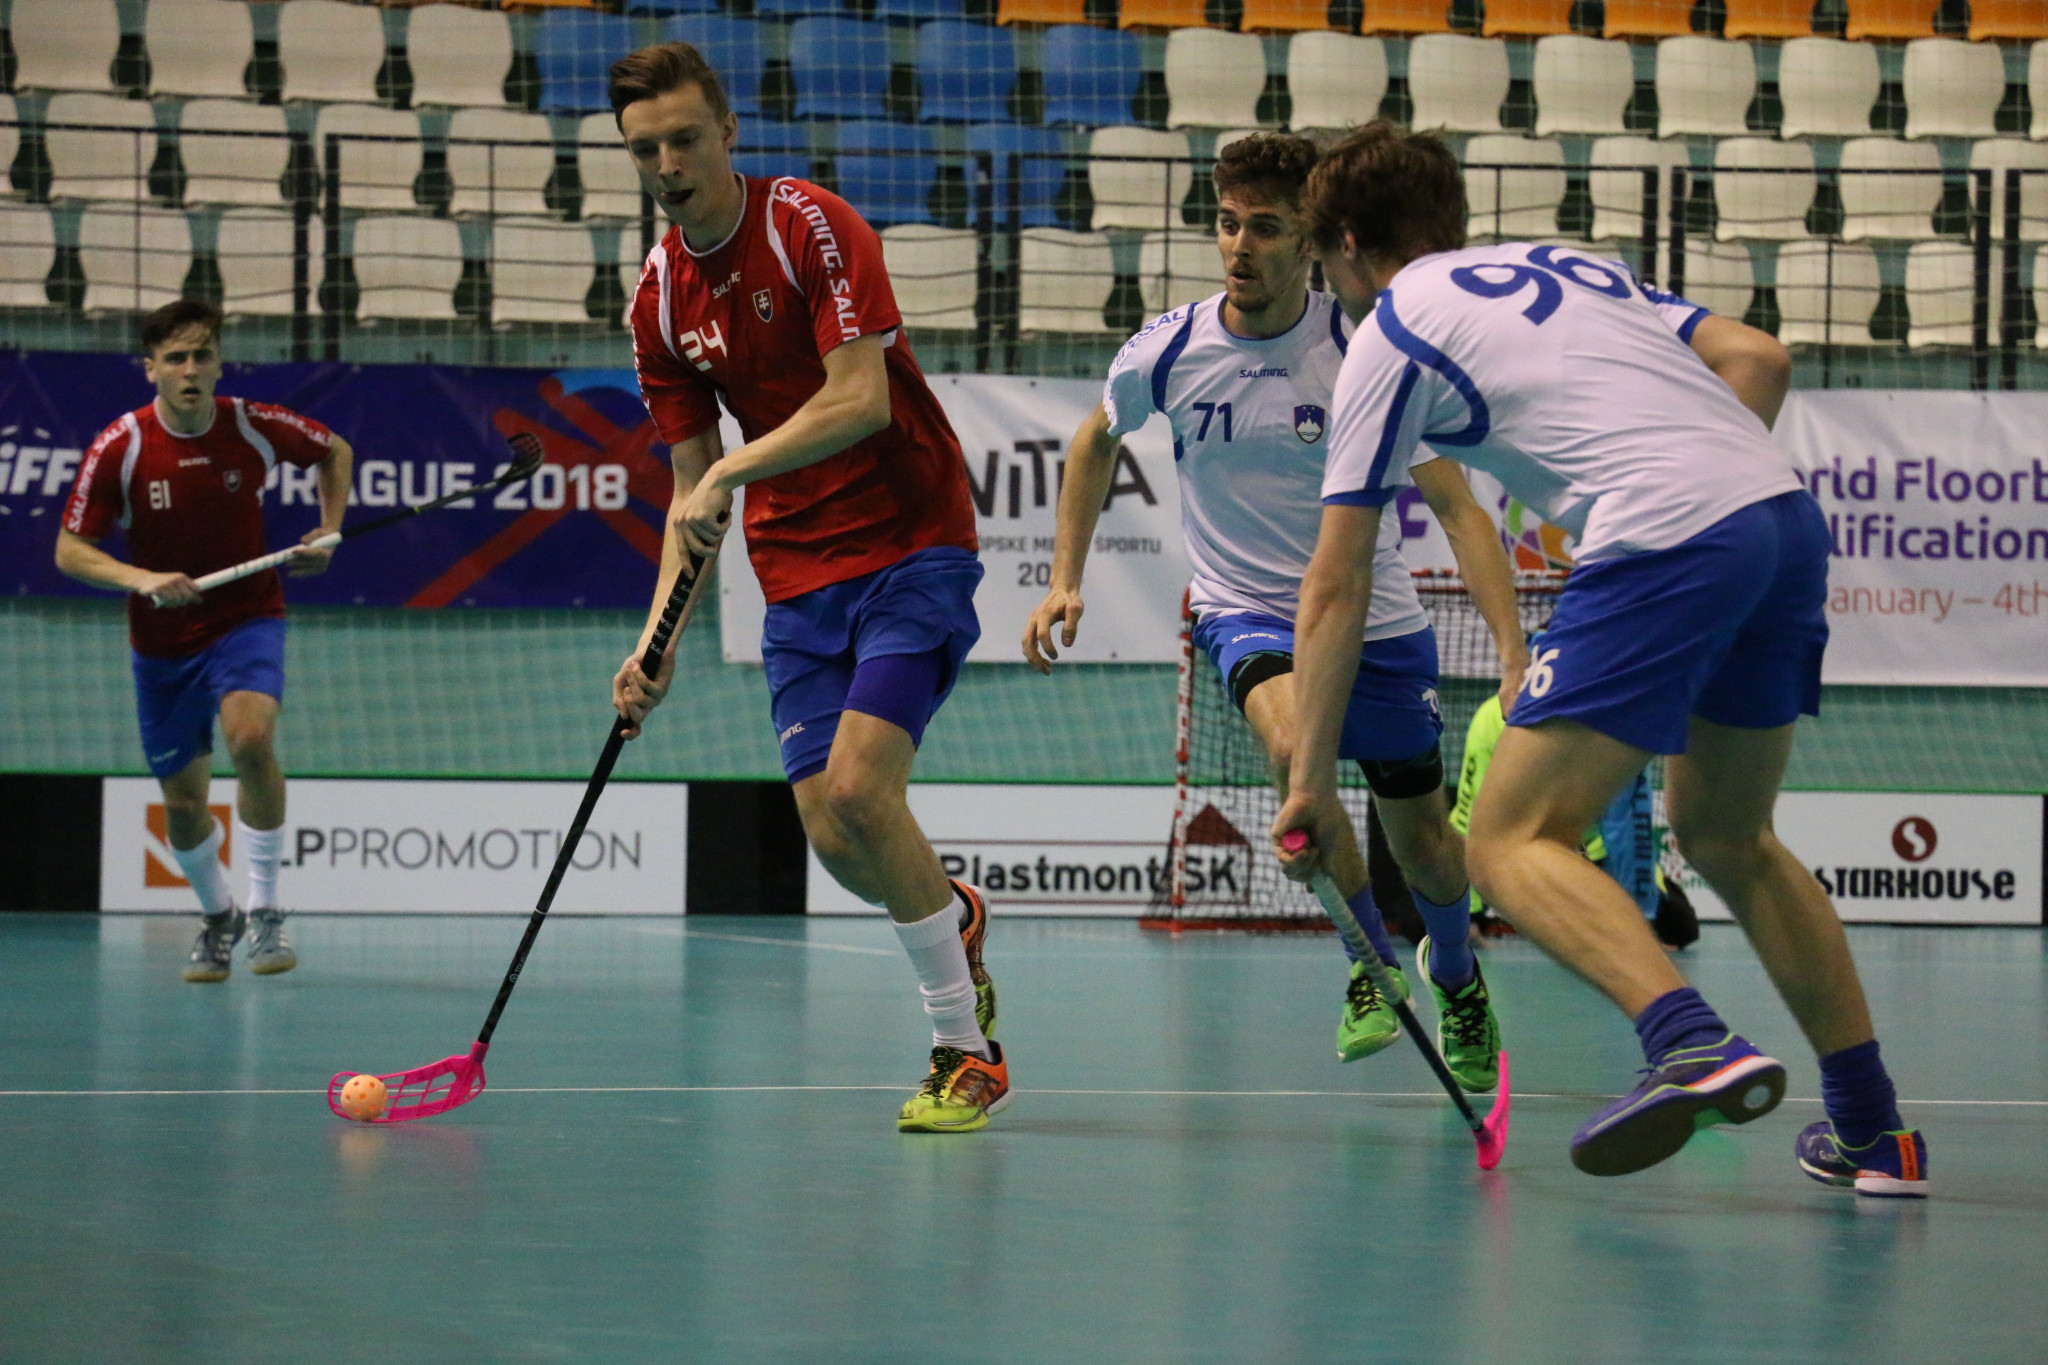 Hosts Slovakia beat Slovenia 7-2 on the opening day of group two action in Nitra ©IFF/Flickr